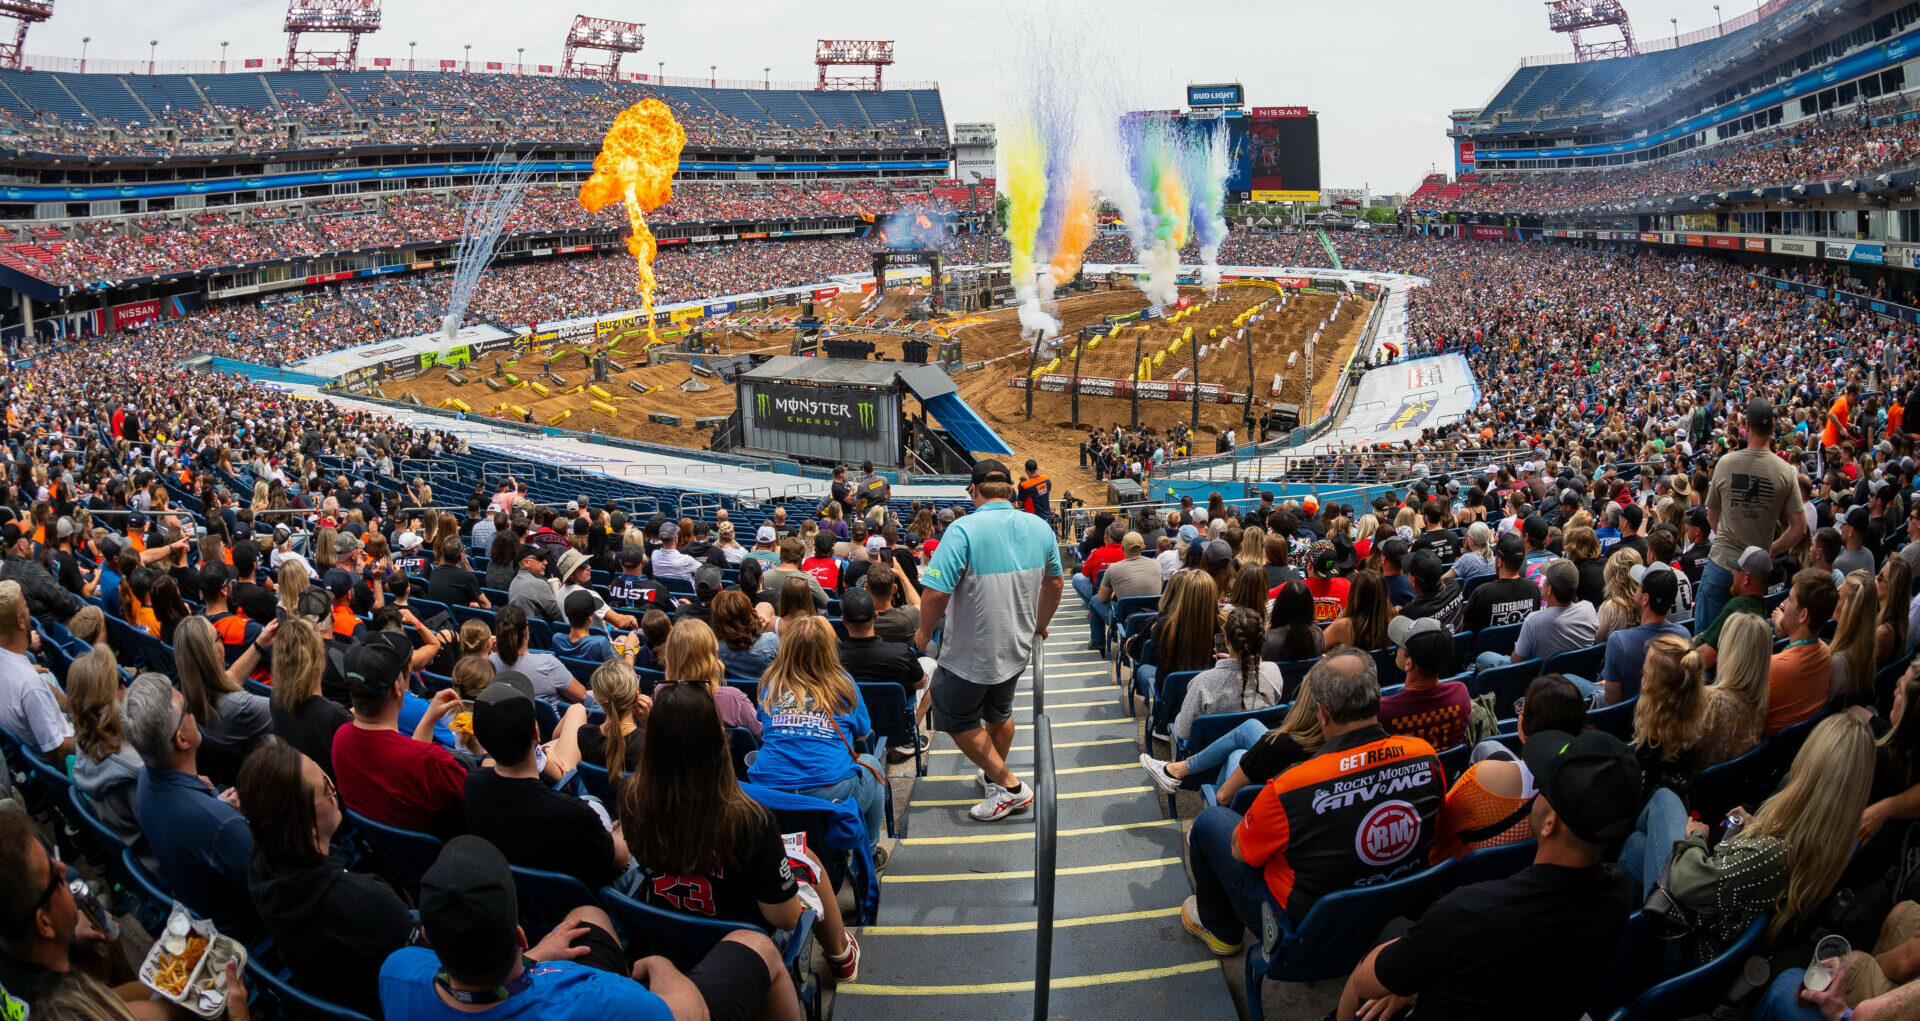 The Supercross series returned to Nashville. Daytime opening ceremonies kicked off the second-ever Supercross race in the Music City. Photo courtesy Feld Motor Sports, Inc.